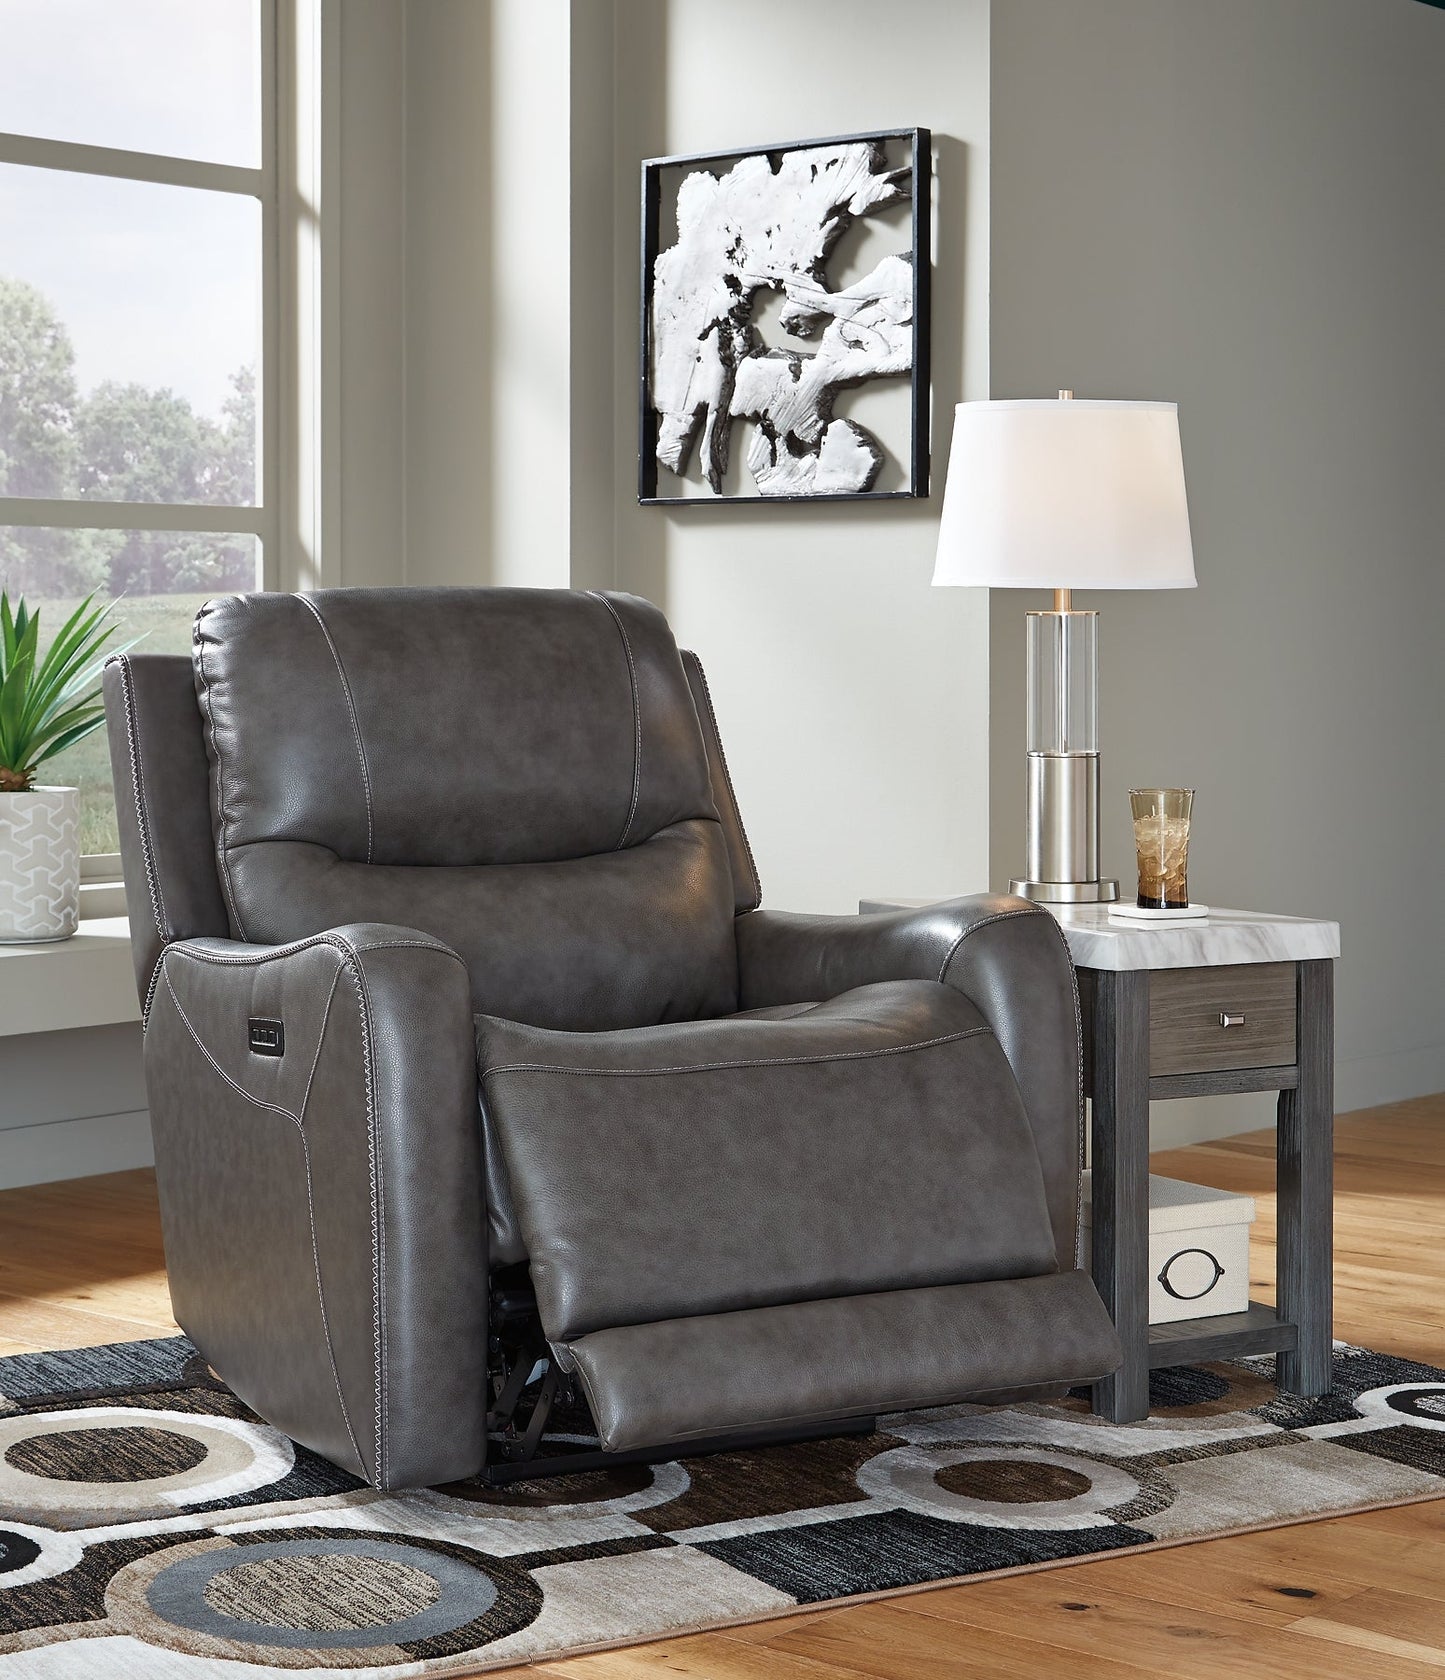 Galahad Zero Wall Recliner w/PWR HDRST Rent Wise Rent To Own Jacksonville, Florida